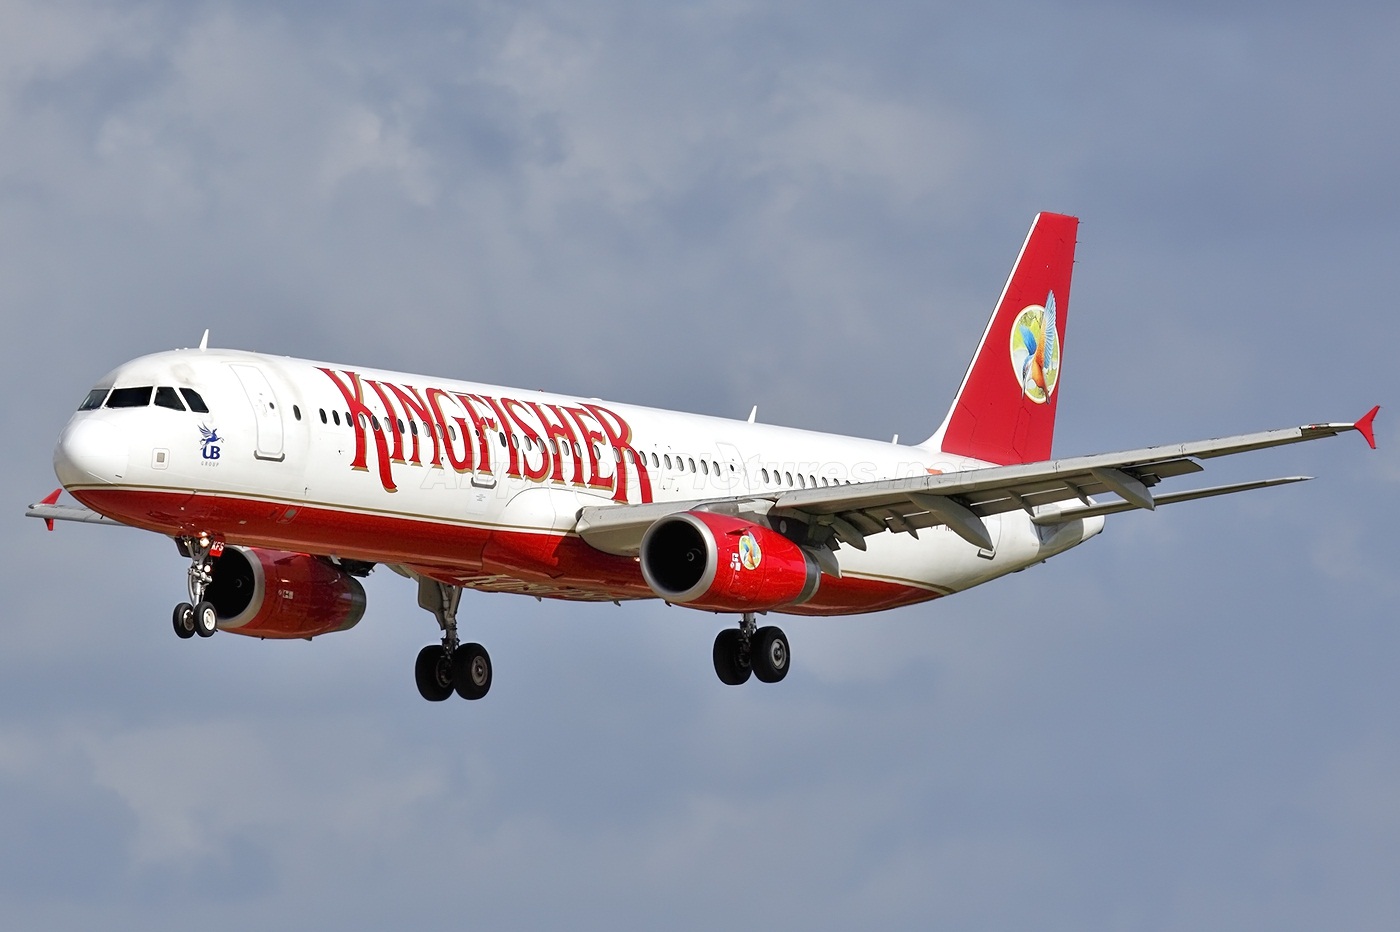 Airbus are being asked to pay a hefty deposit in order to purchase the fleet of planes from the now defunct Kingfisher Airlines.